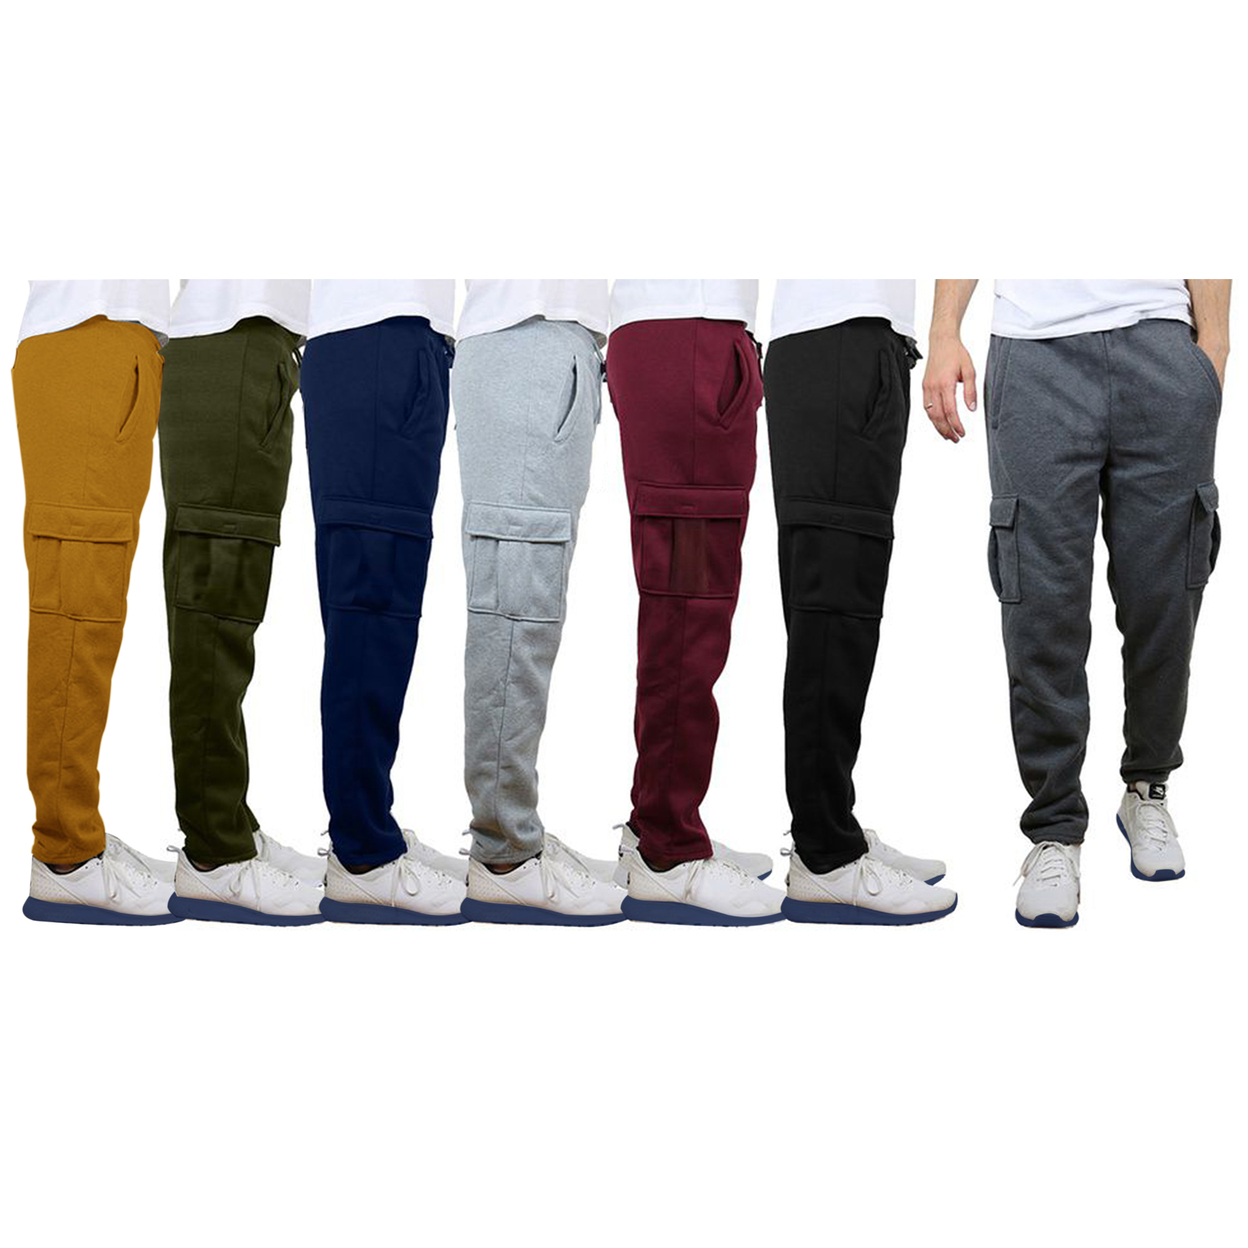 Multipack Men's Casual Solid Cargo Jogger Sweatpants With Pockets - 3, L